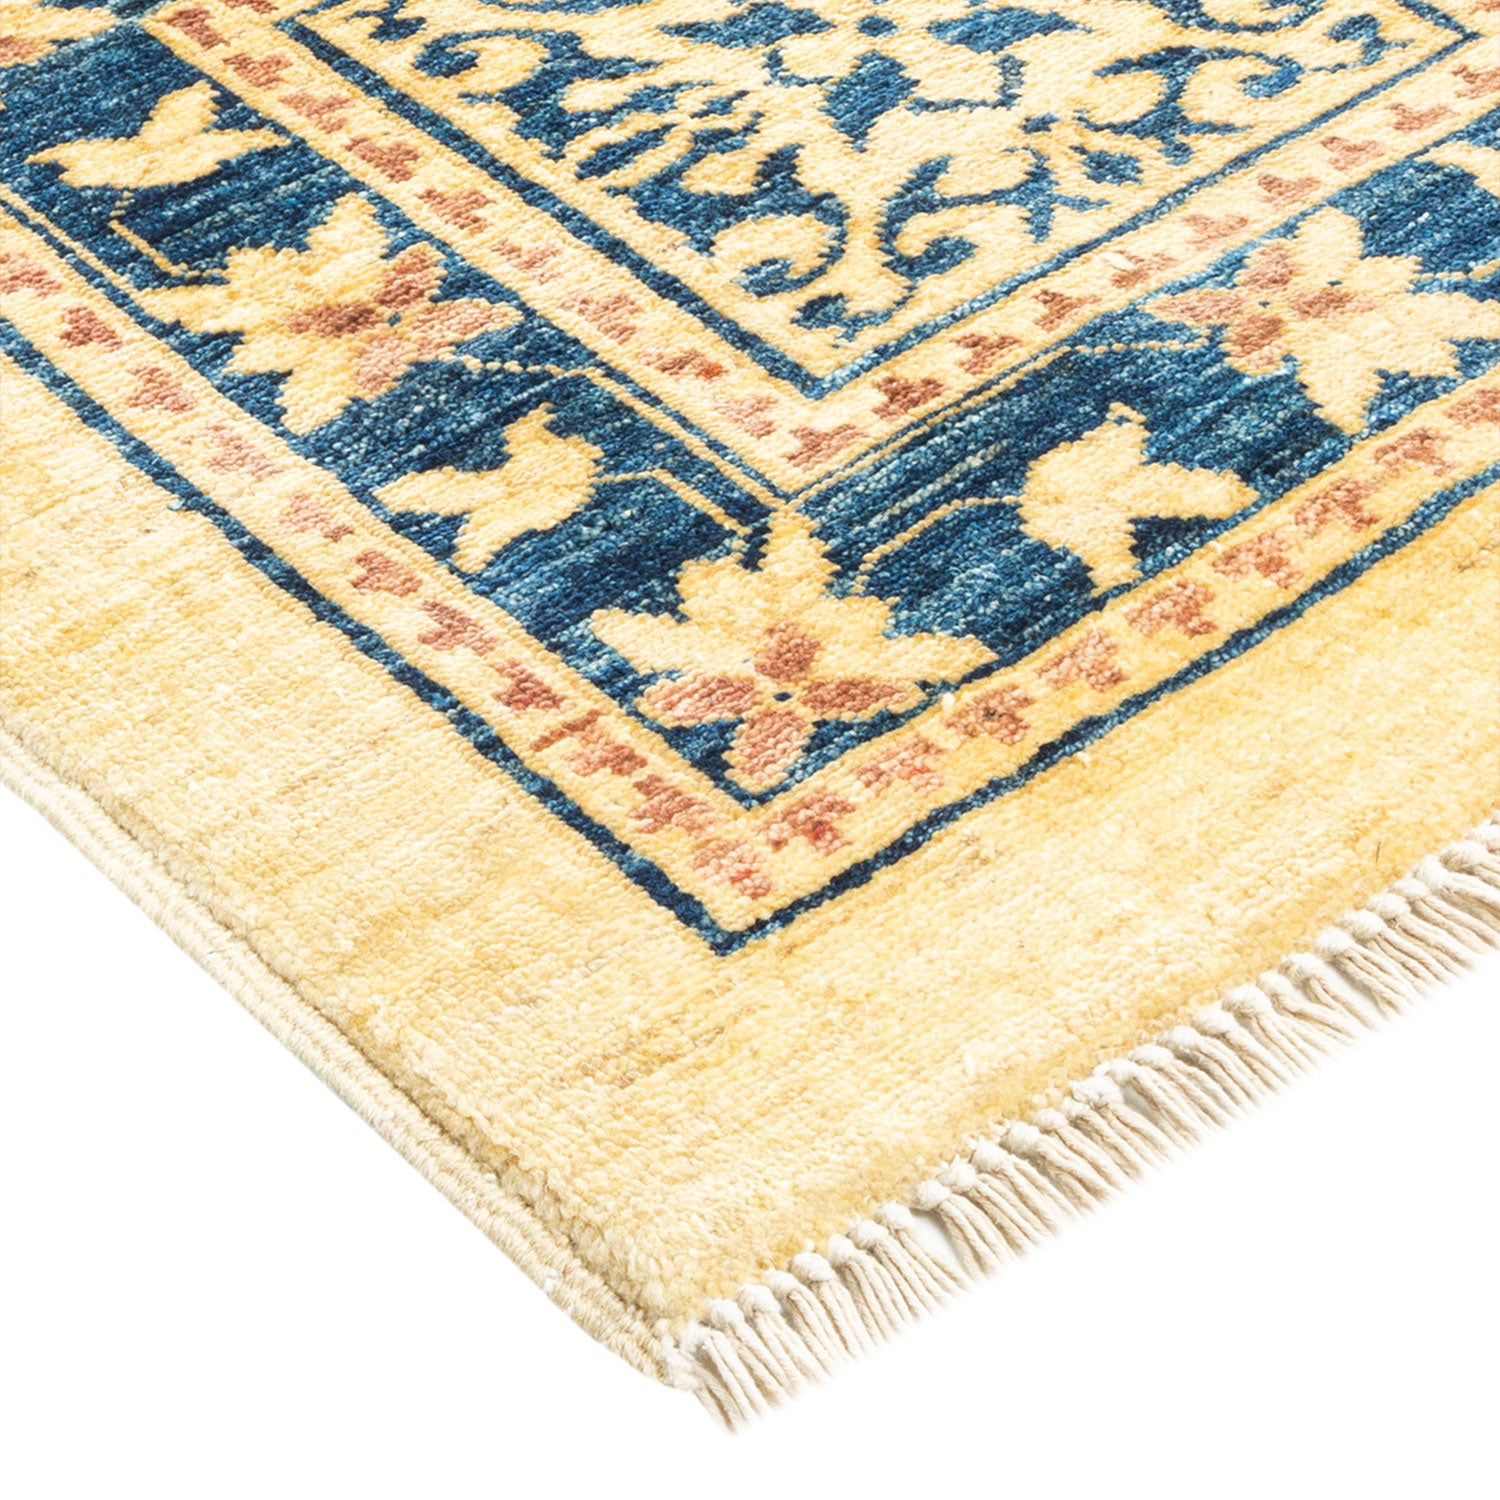 Exquisite, machine-made or handcrafted rug with floral patterns and fringe